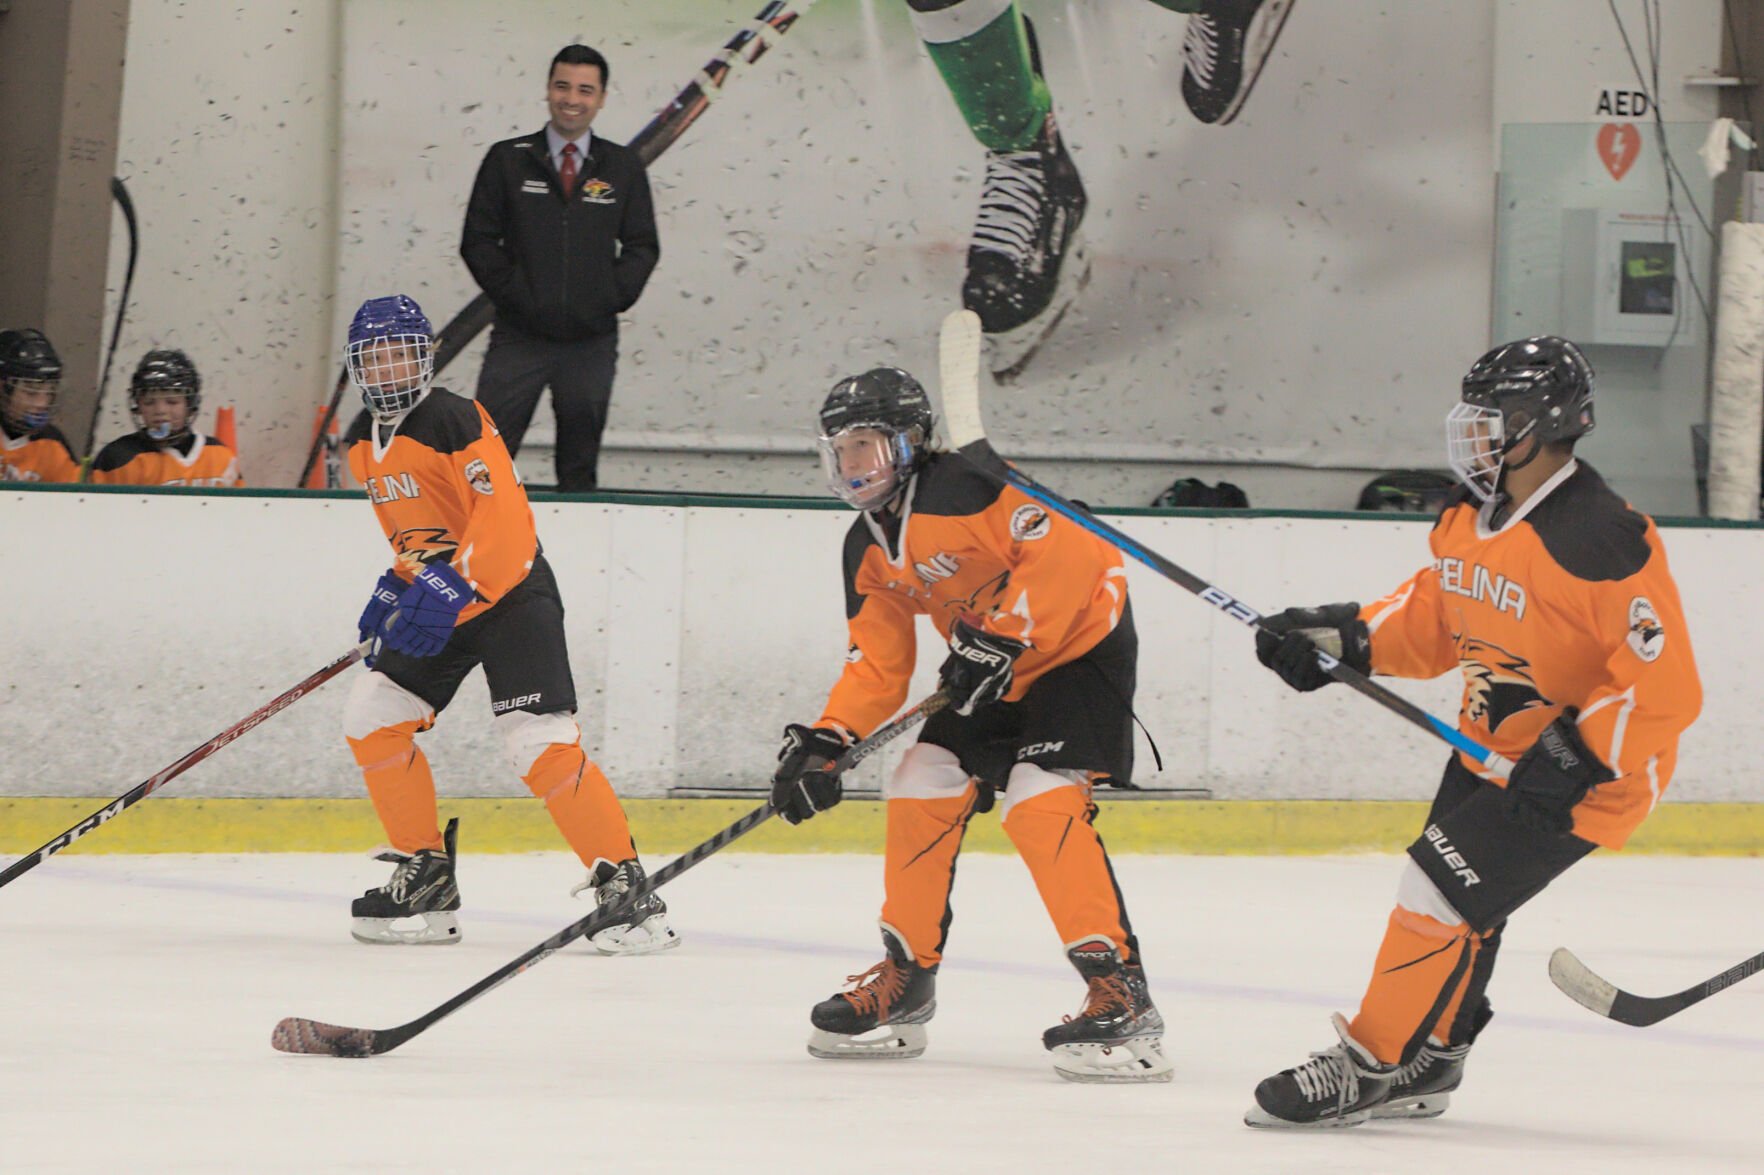 Hockey in Celina, Texas? You bet, as Celina Hockey Association looks ahead to growth after first season Celina Record starlocalmedia picture photo